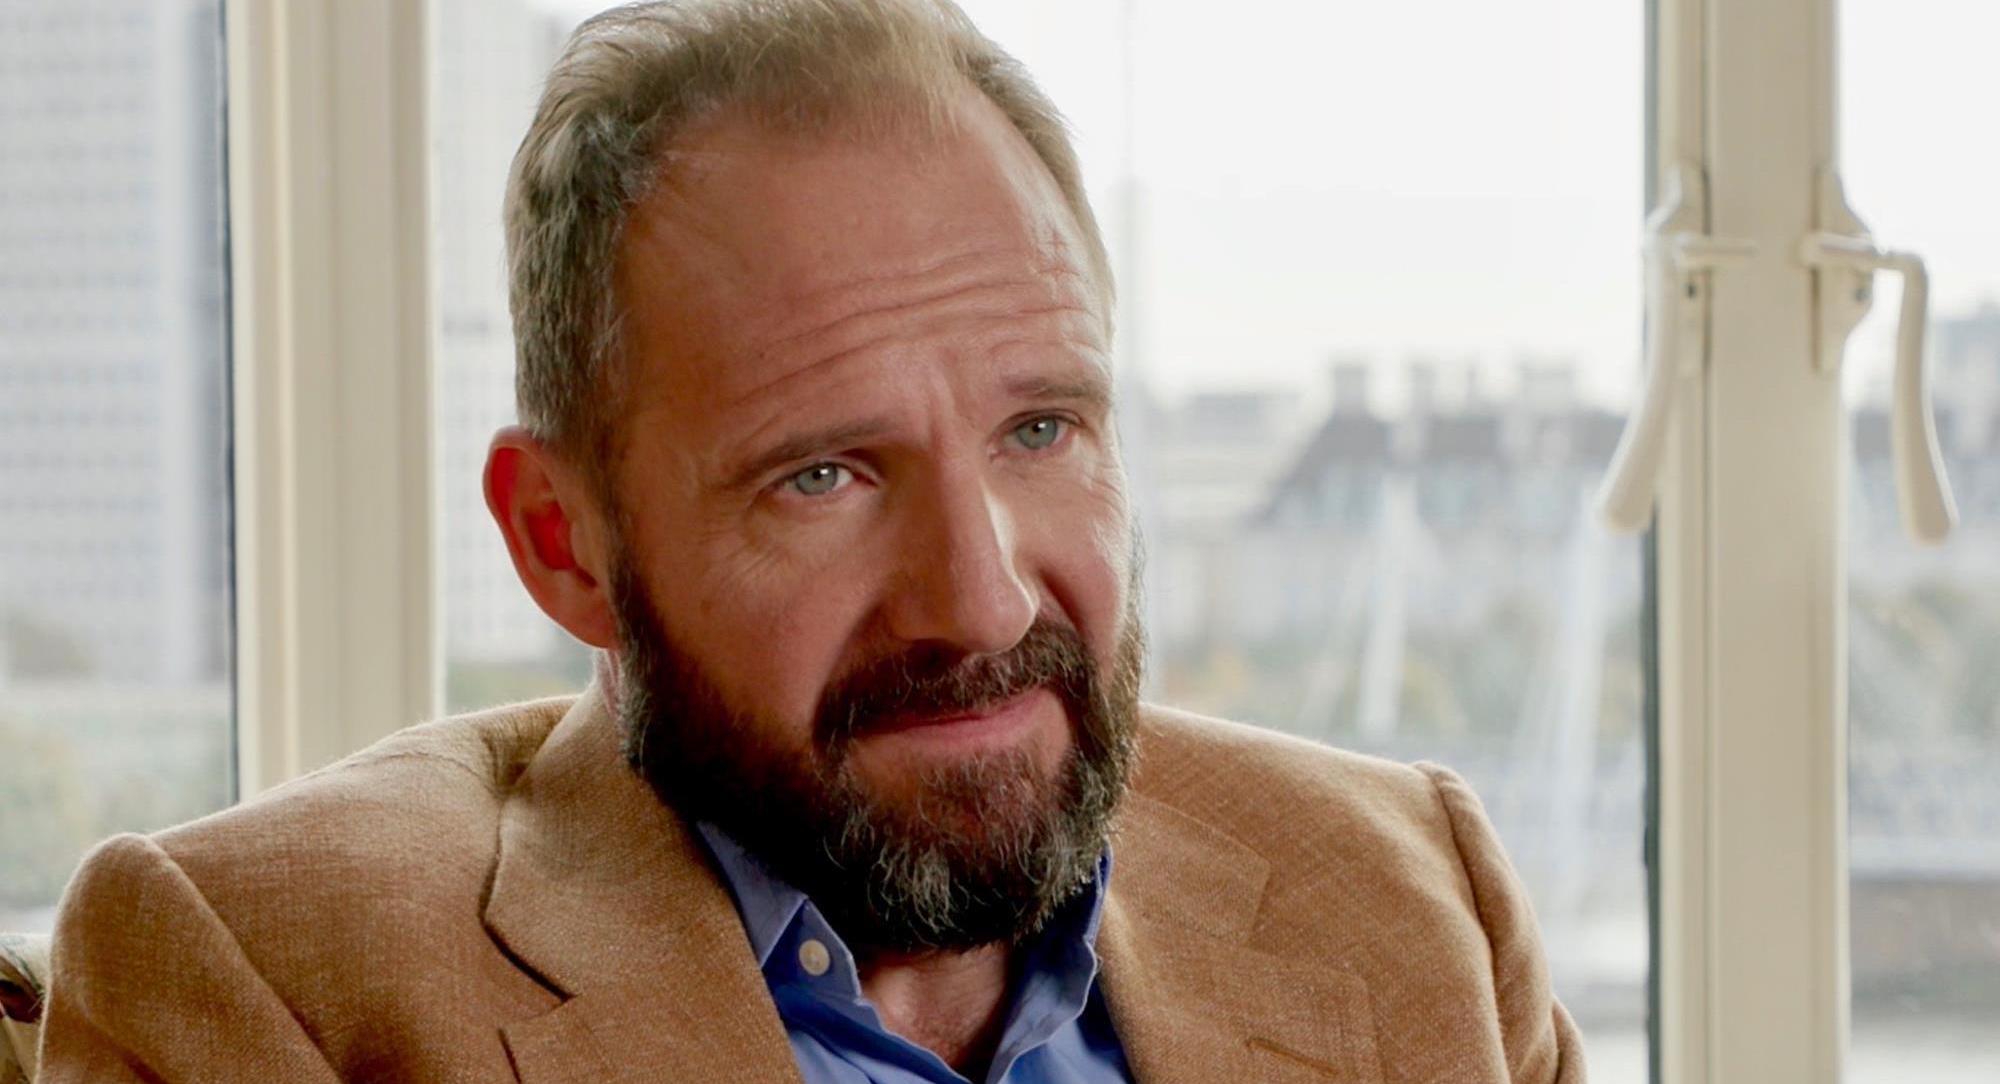 Bearded Ralph Fiennes in a blue shirt paired with a brown jacket against a window